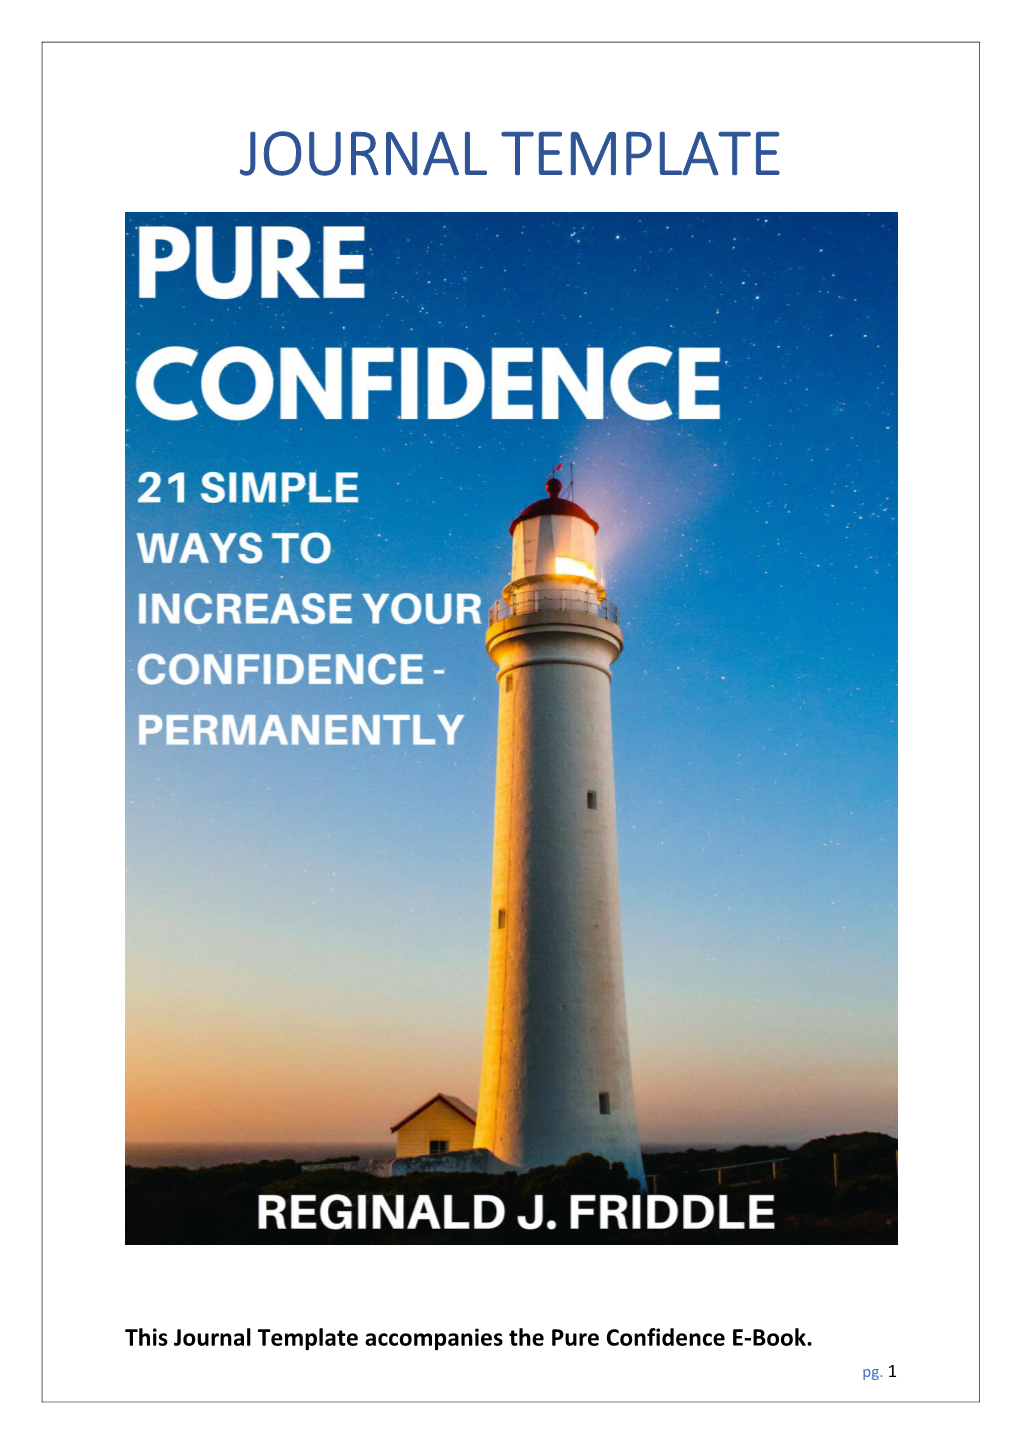 This Journal Template Accompanies the Pure Confidence E-Book